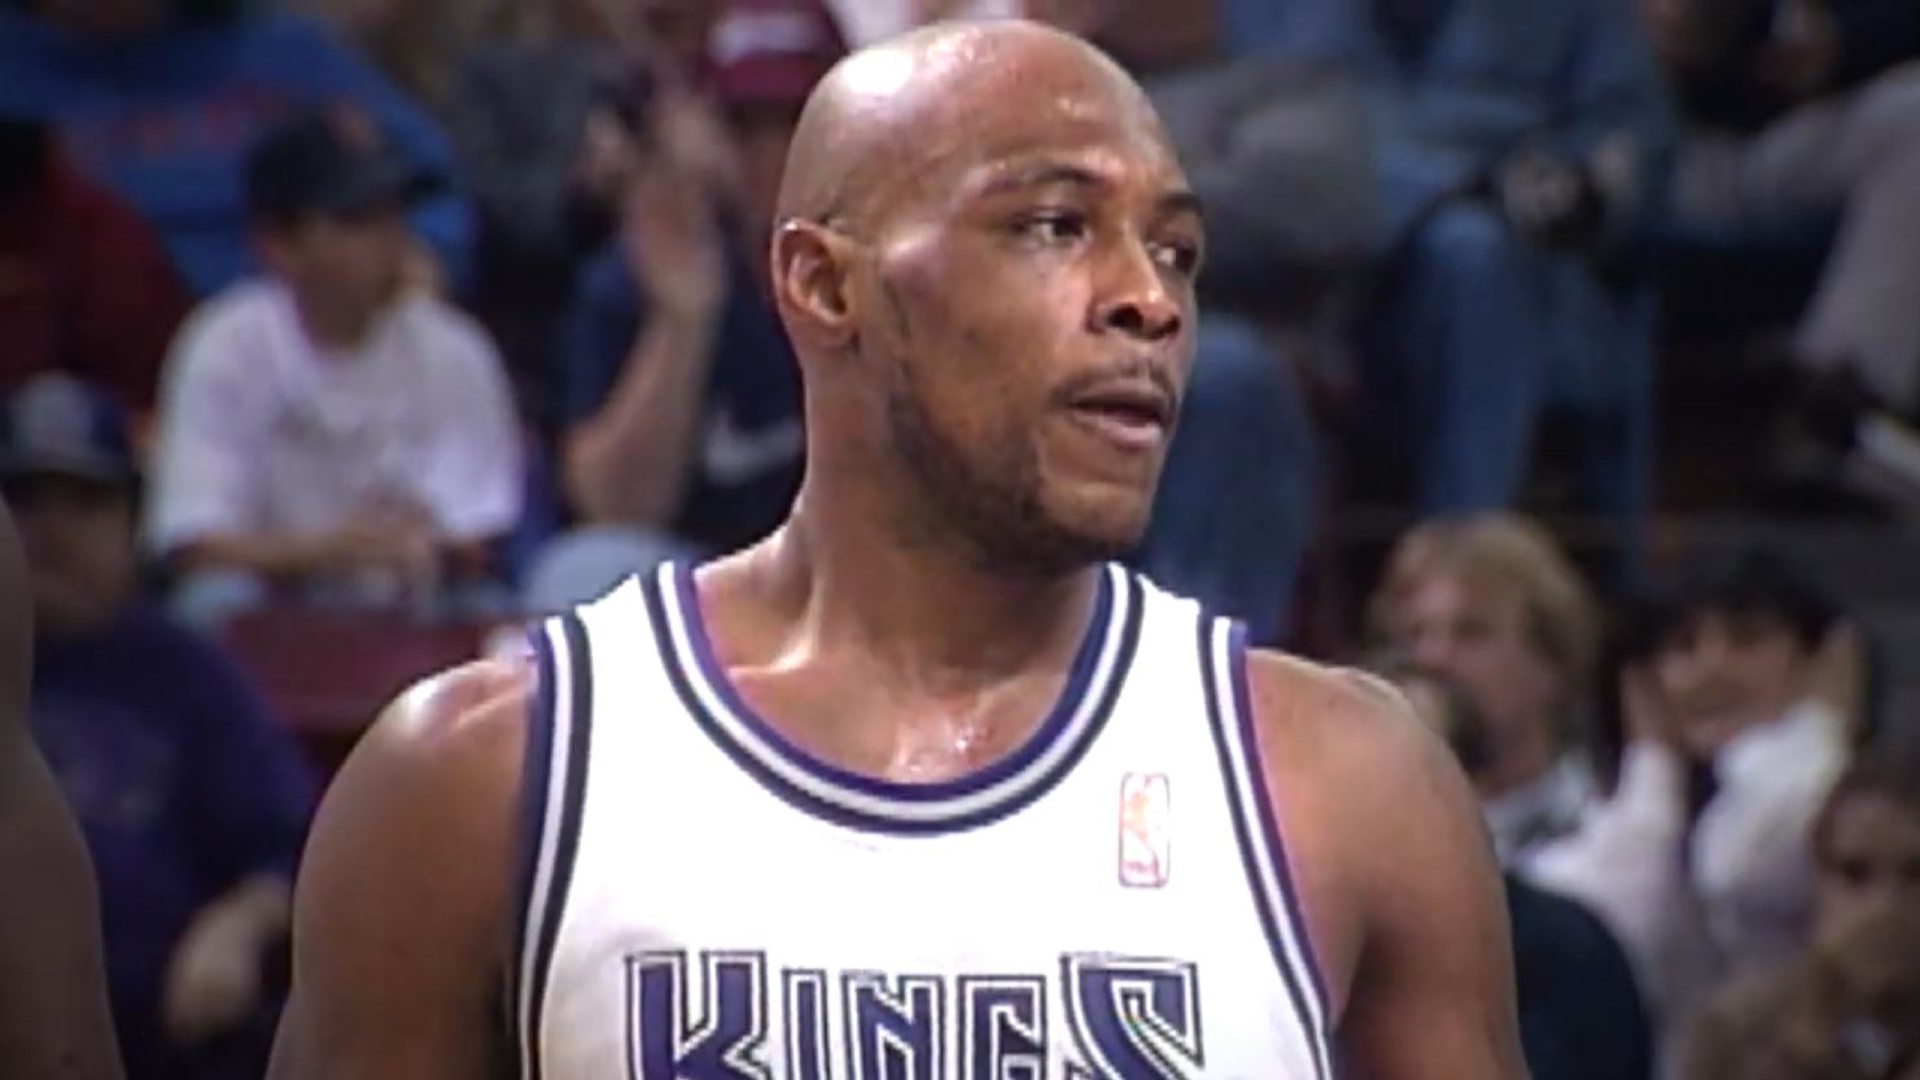 Hall-of-Famer & Sacramento Kings legend Mitch Richmond joins ABC10's Sean Cunningham discussing his battles against Michael Jordan to remember the late Marty McNeal.